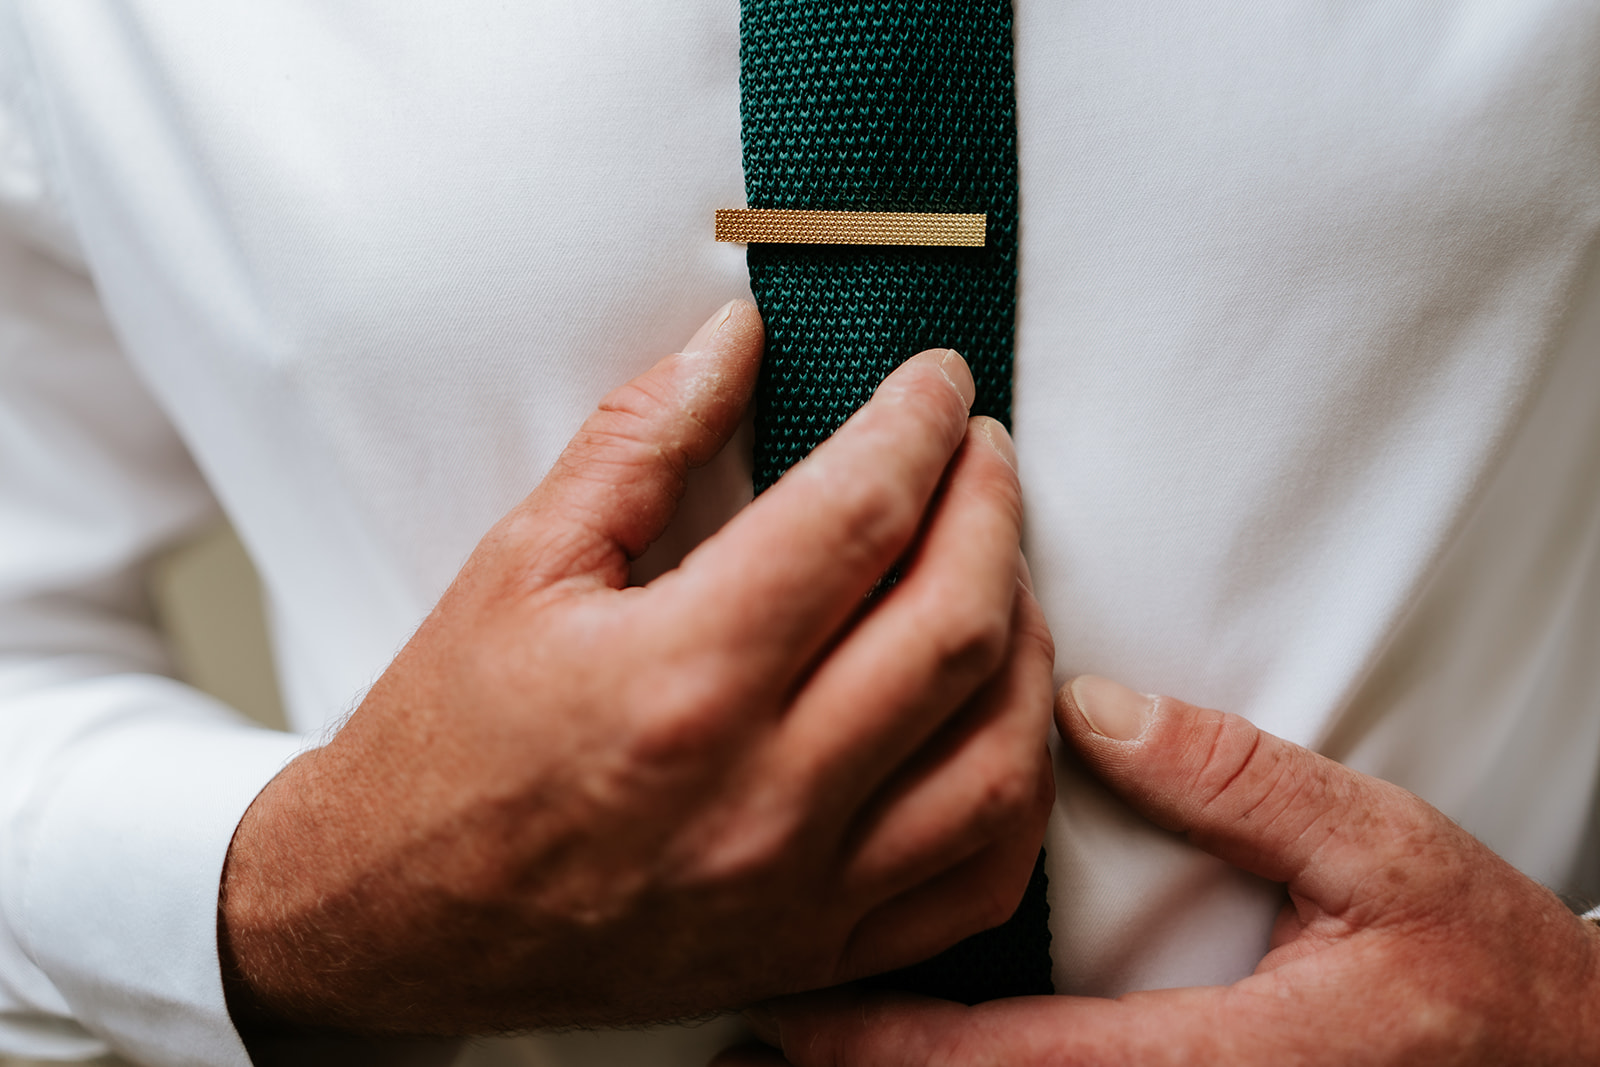 A candid photograph of a groom adjusting his tie before his wedding.